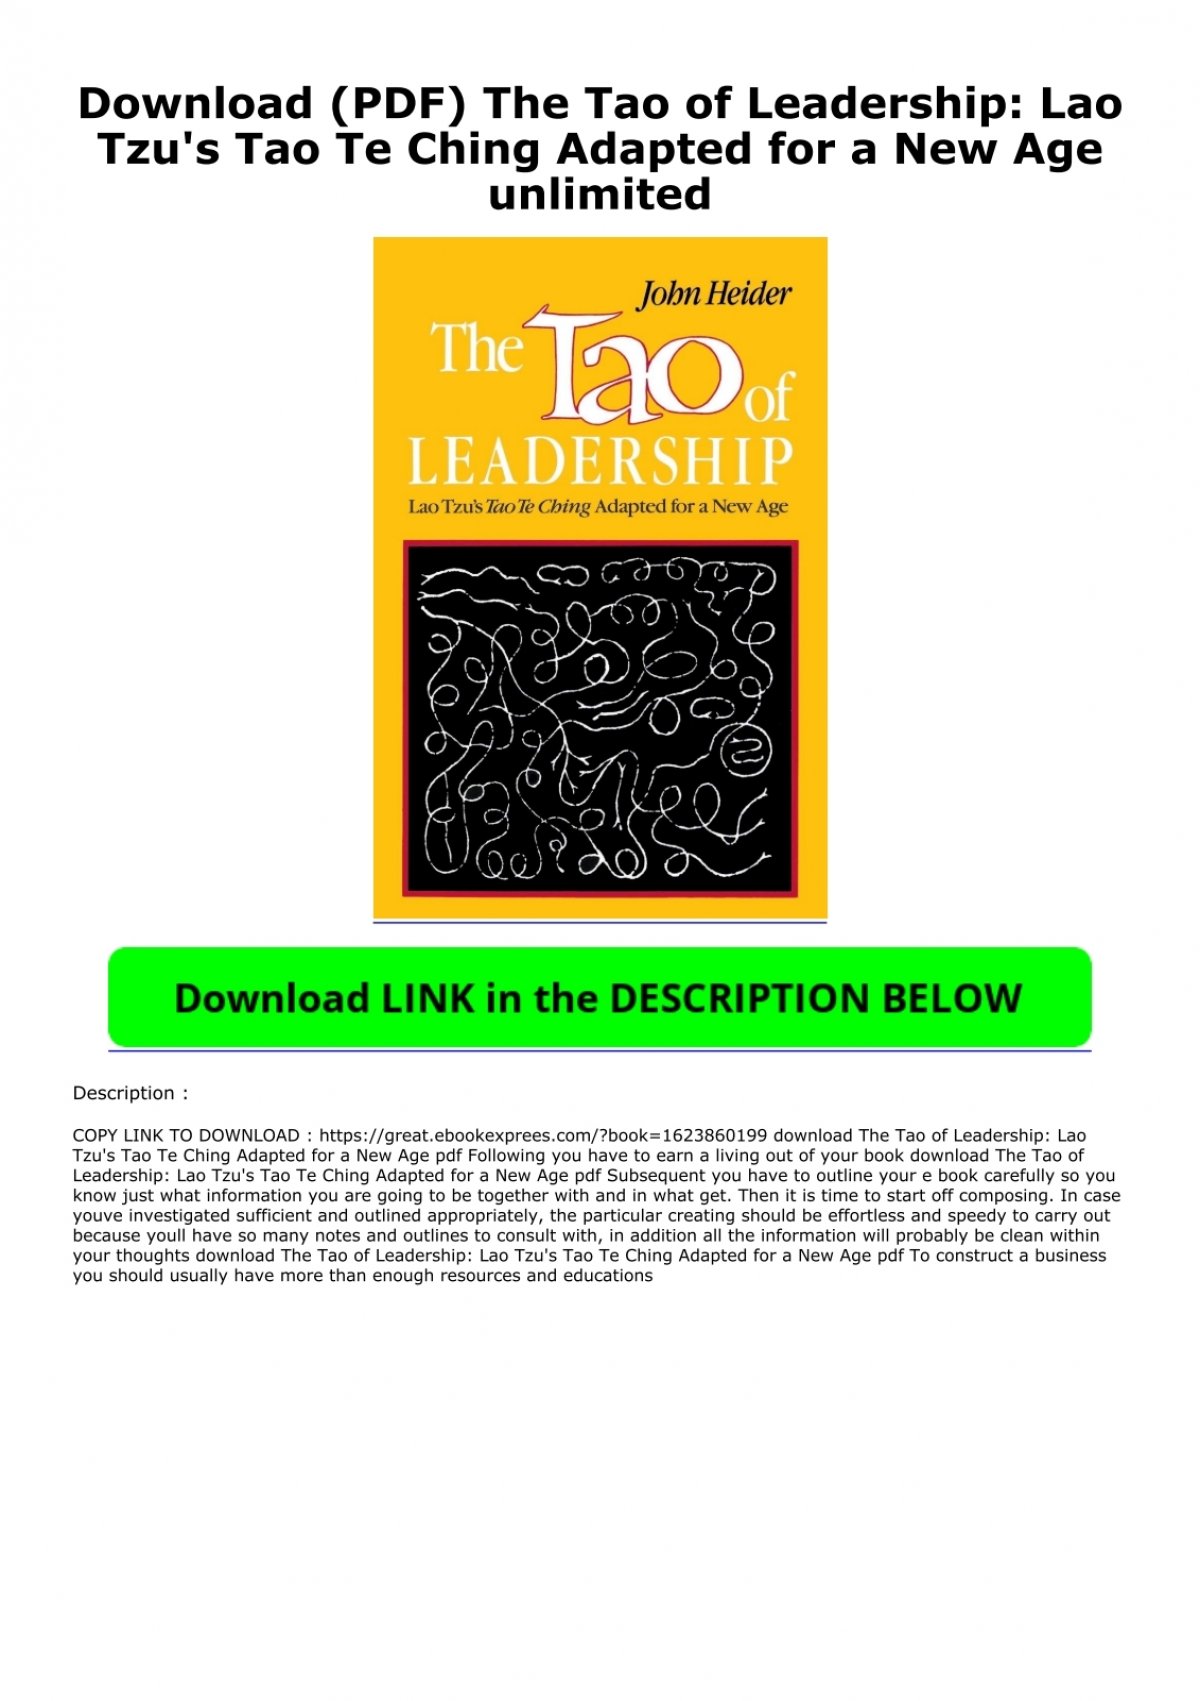 Download (PDF) The Tao of Leadership: Lao Tzu's Tao Te Ching Adapted for a  New Age unlimited